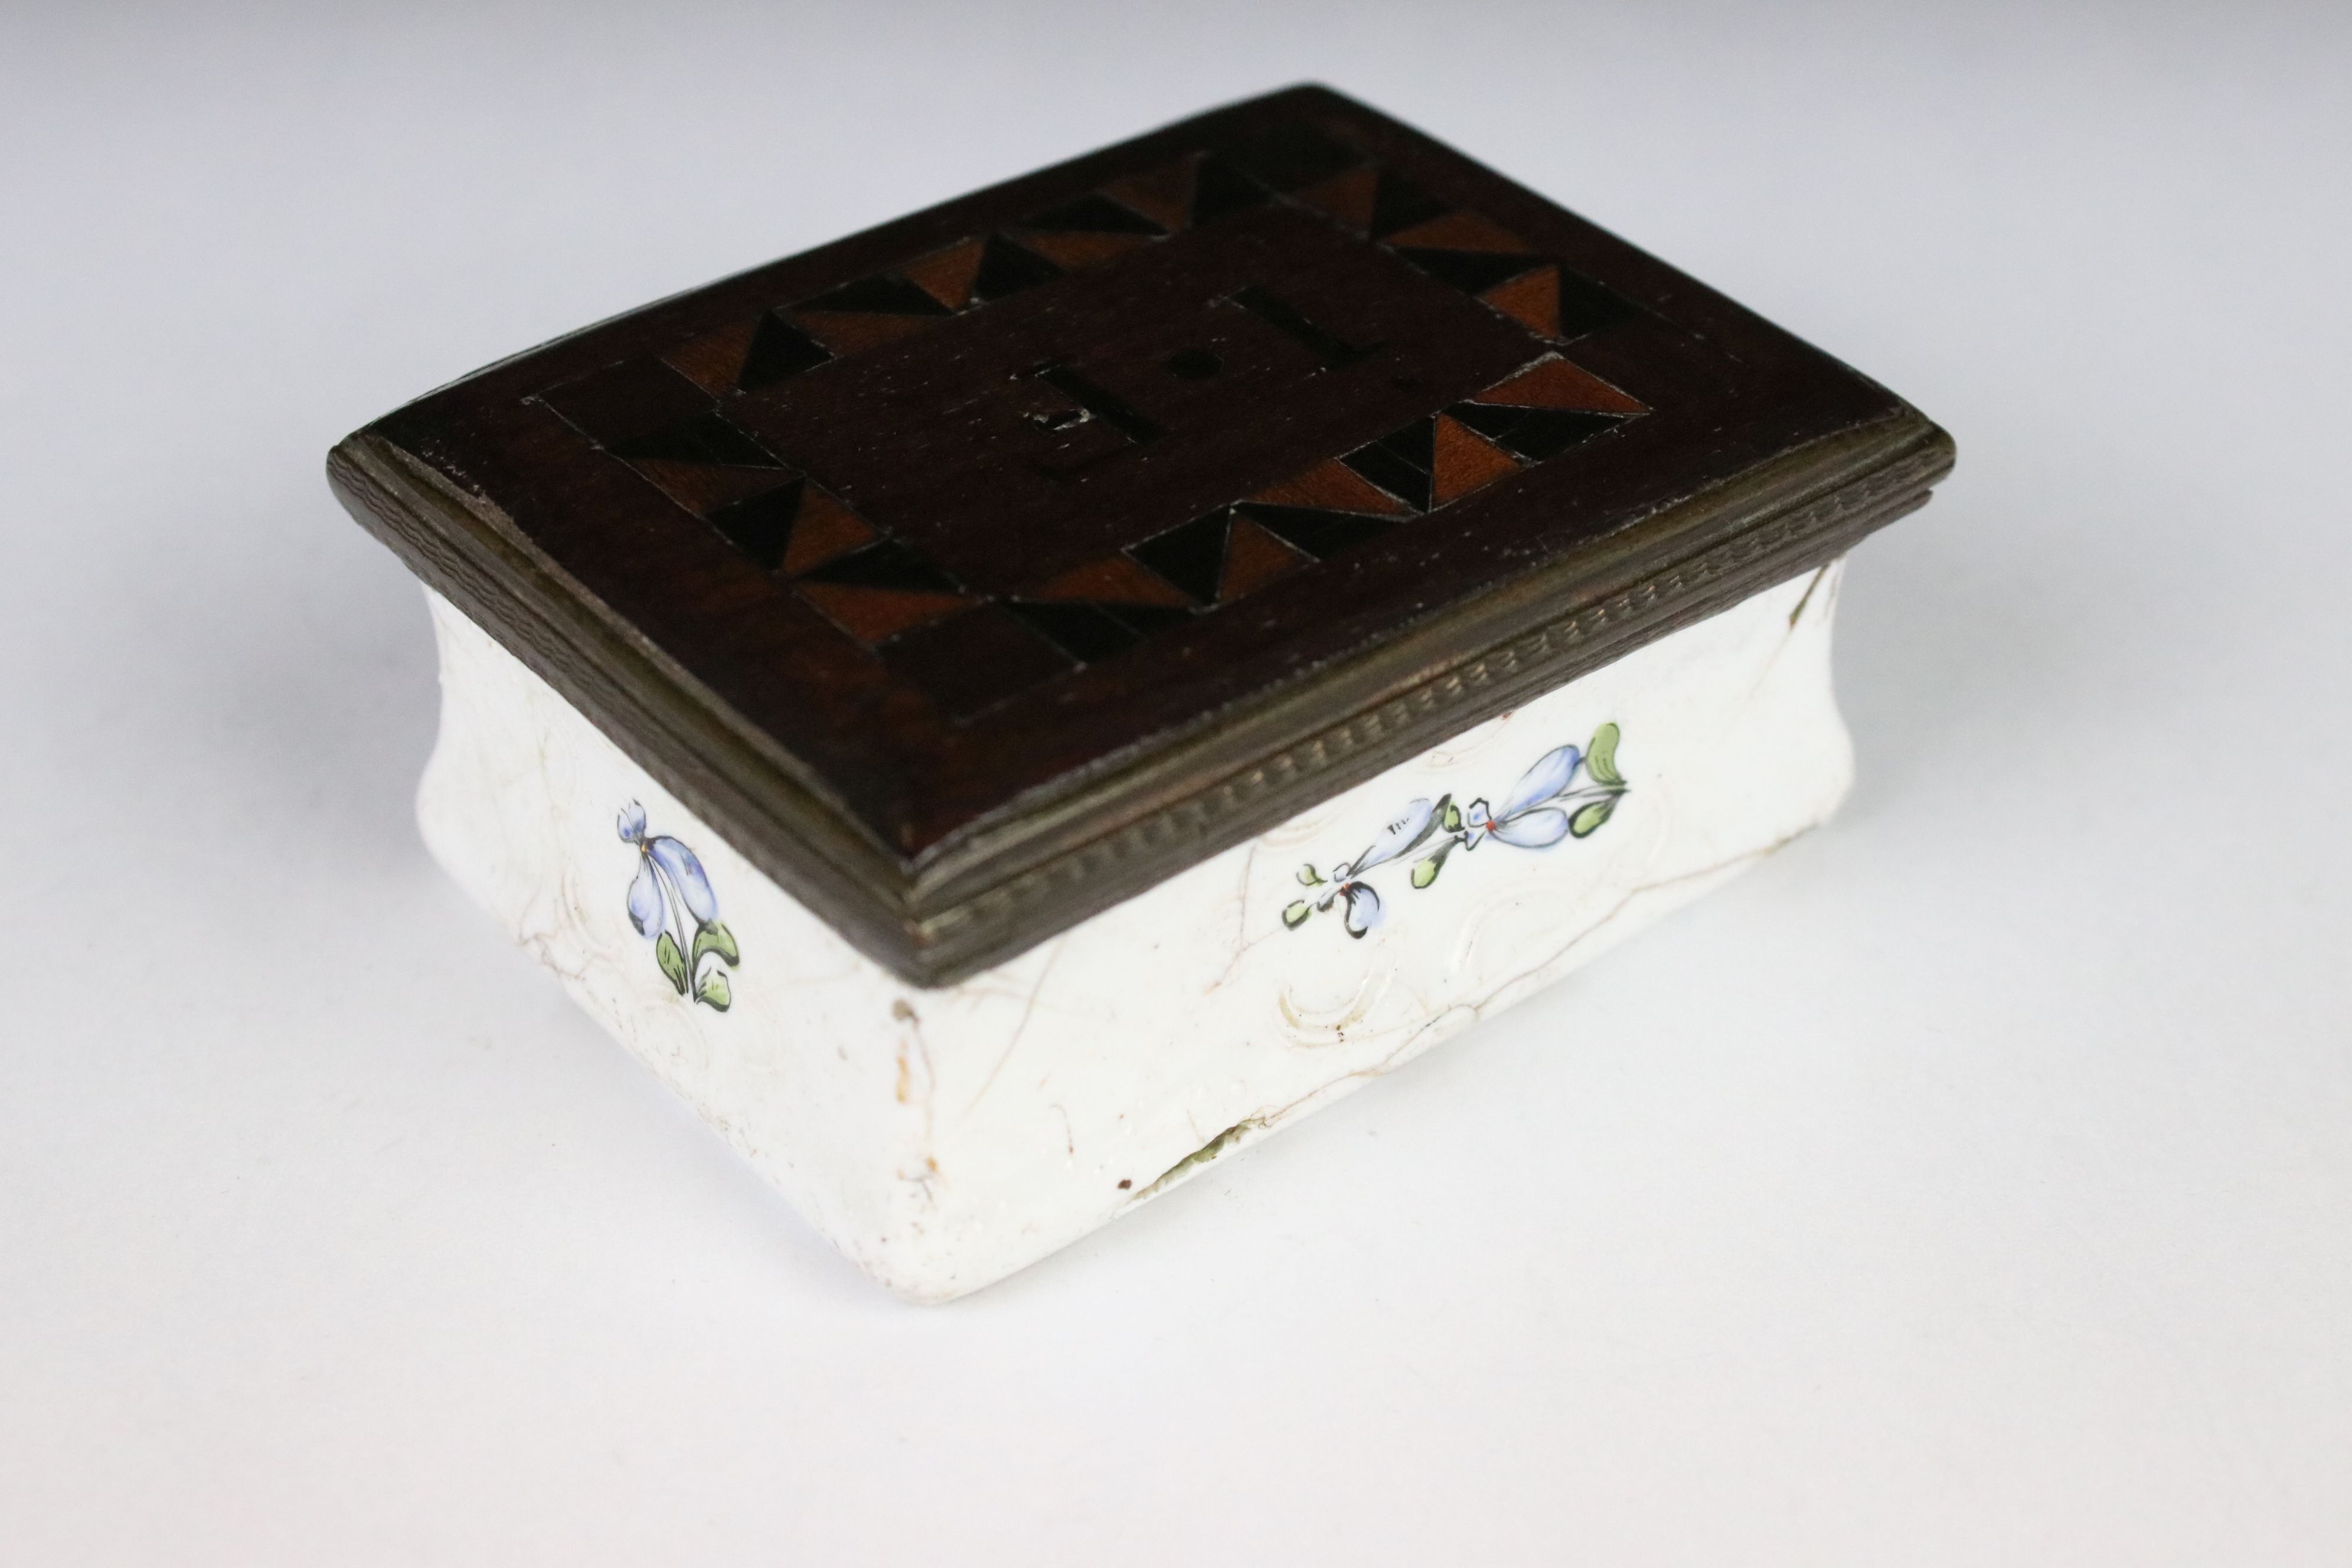 An antique enamel trinket box with floral decoration an decoratively inlaid wooden lid, initialed - Image 3 of 5